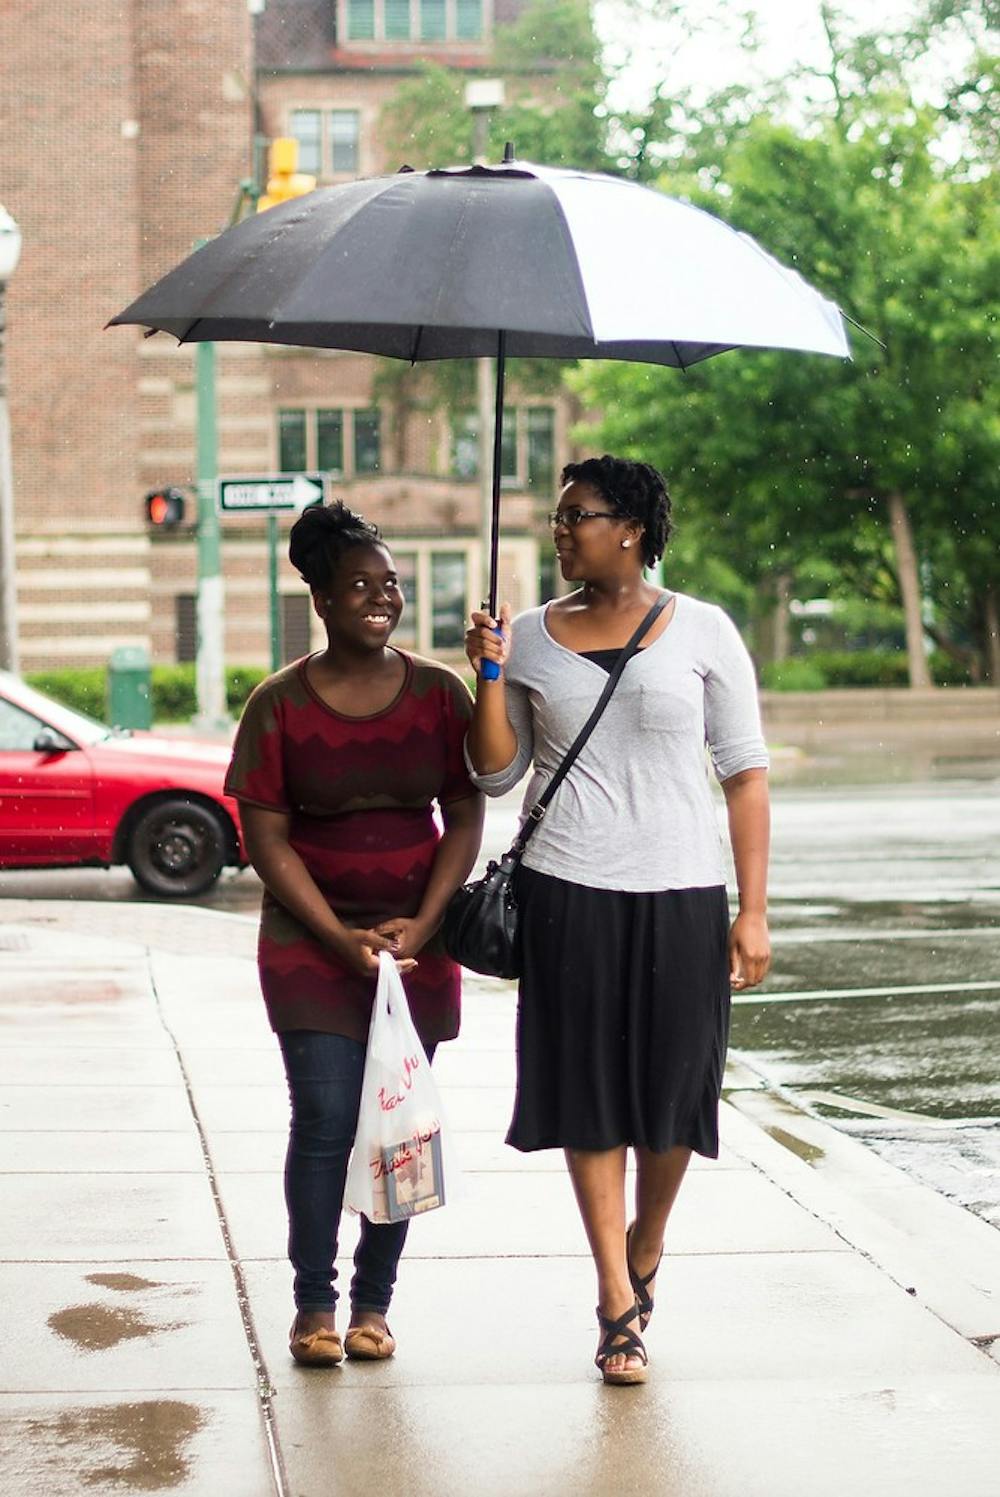 <p>Lansing residents Danielle Brown, left, and Jumoke Shoneye, right, try to stay dry June 4, 2014, on East Grand River in front of Cosi. It rained most of the day in the East Lansing area, dropping the temperature into the 60s. Hayden Fennoy/The State News</p>